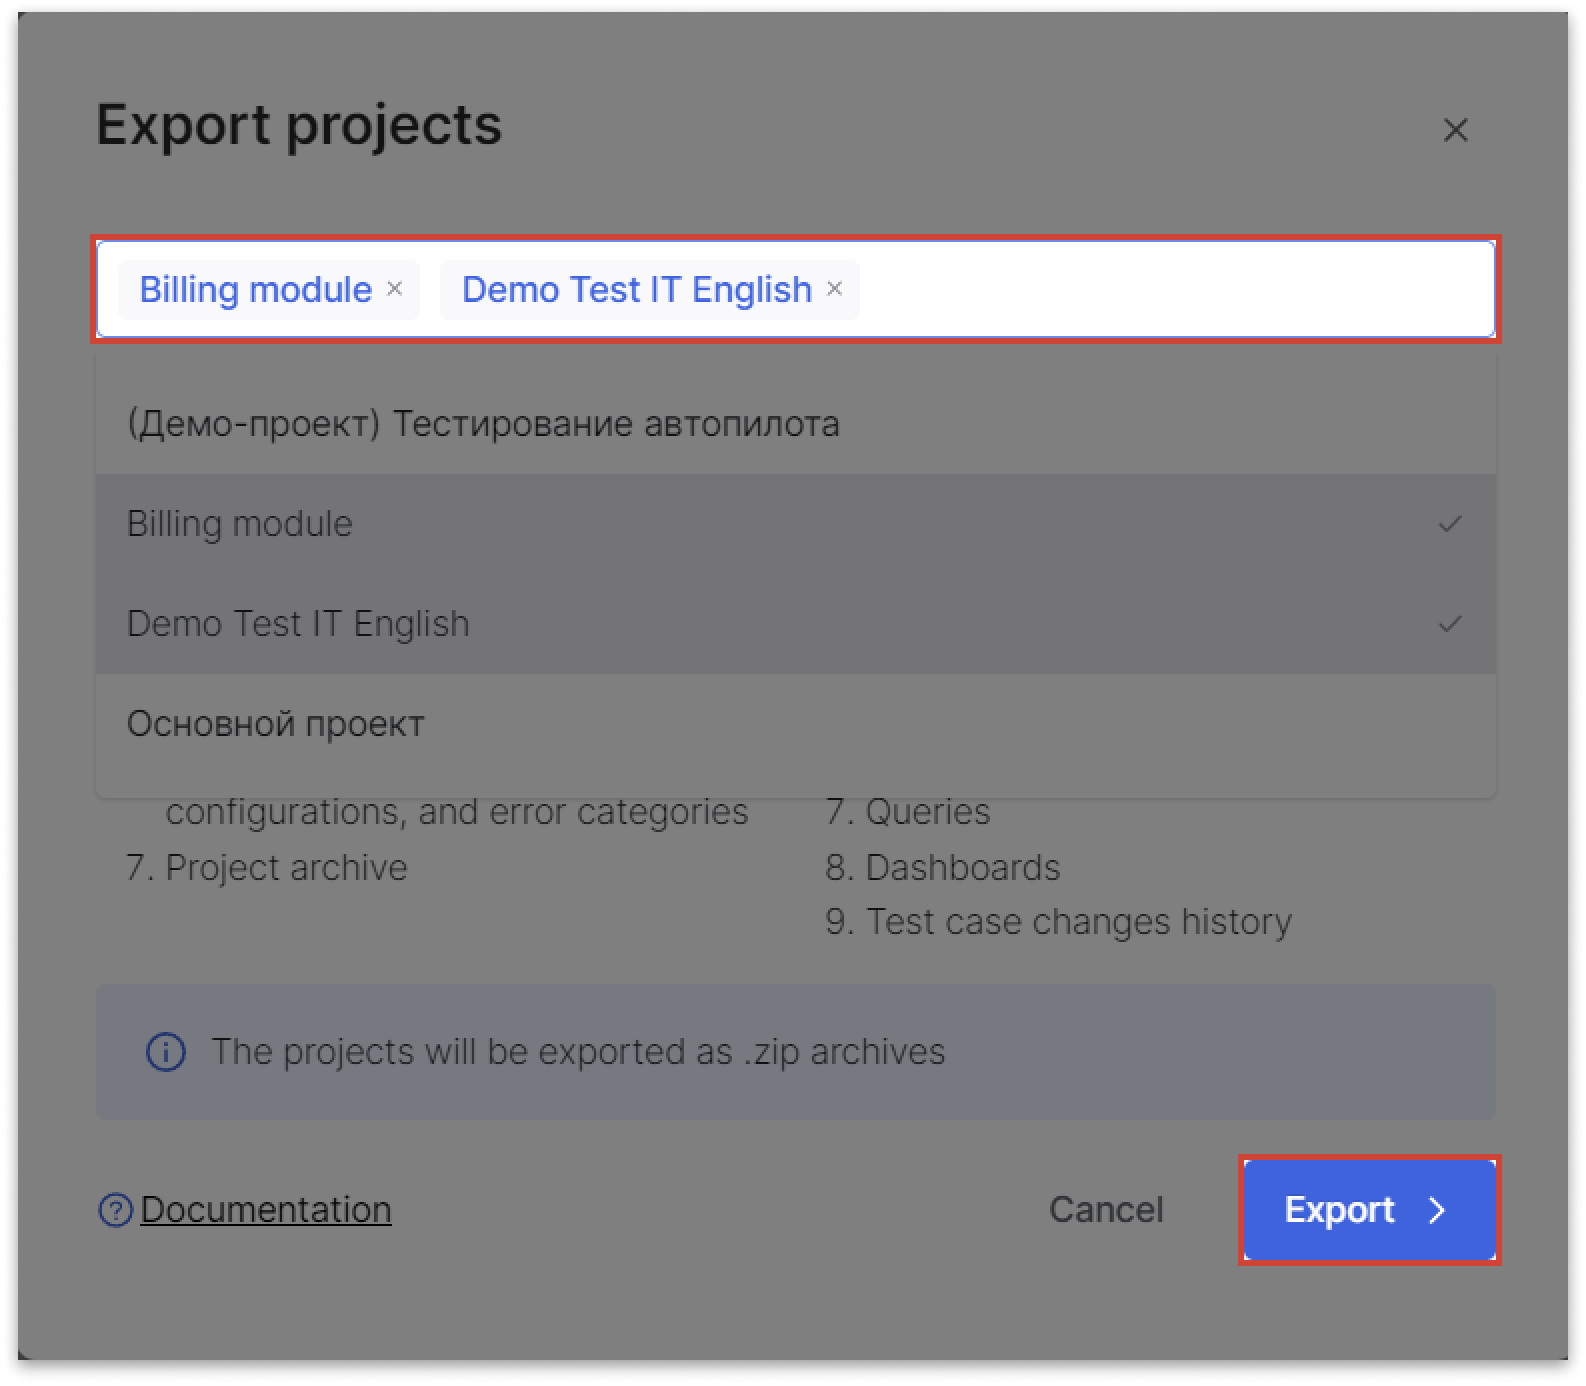 Bulk project export from Test IT TMS, the Export projects window